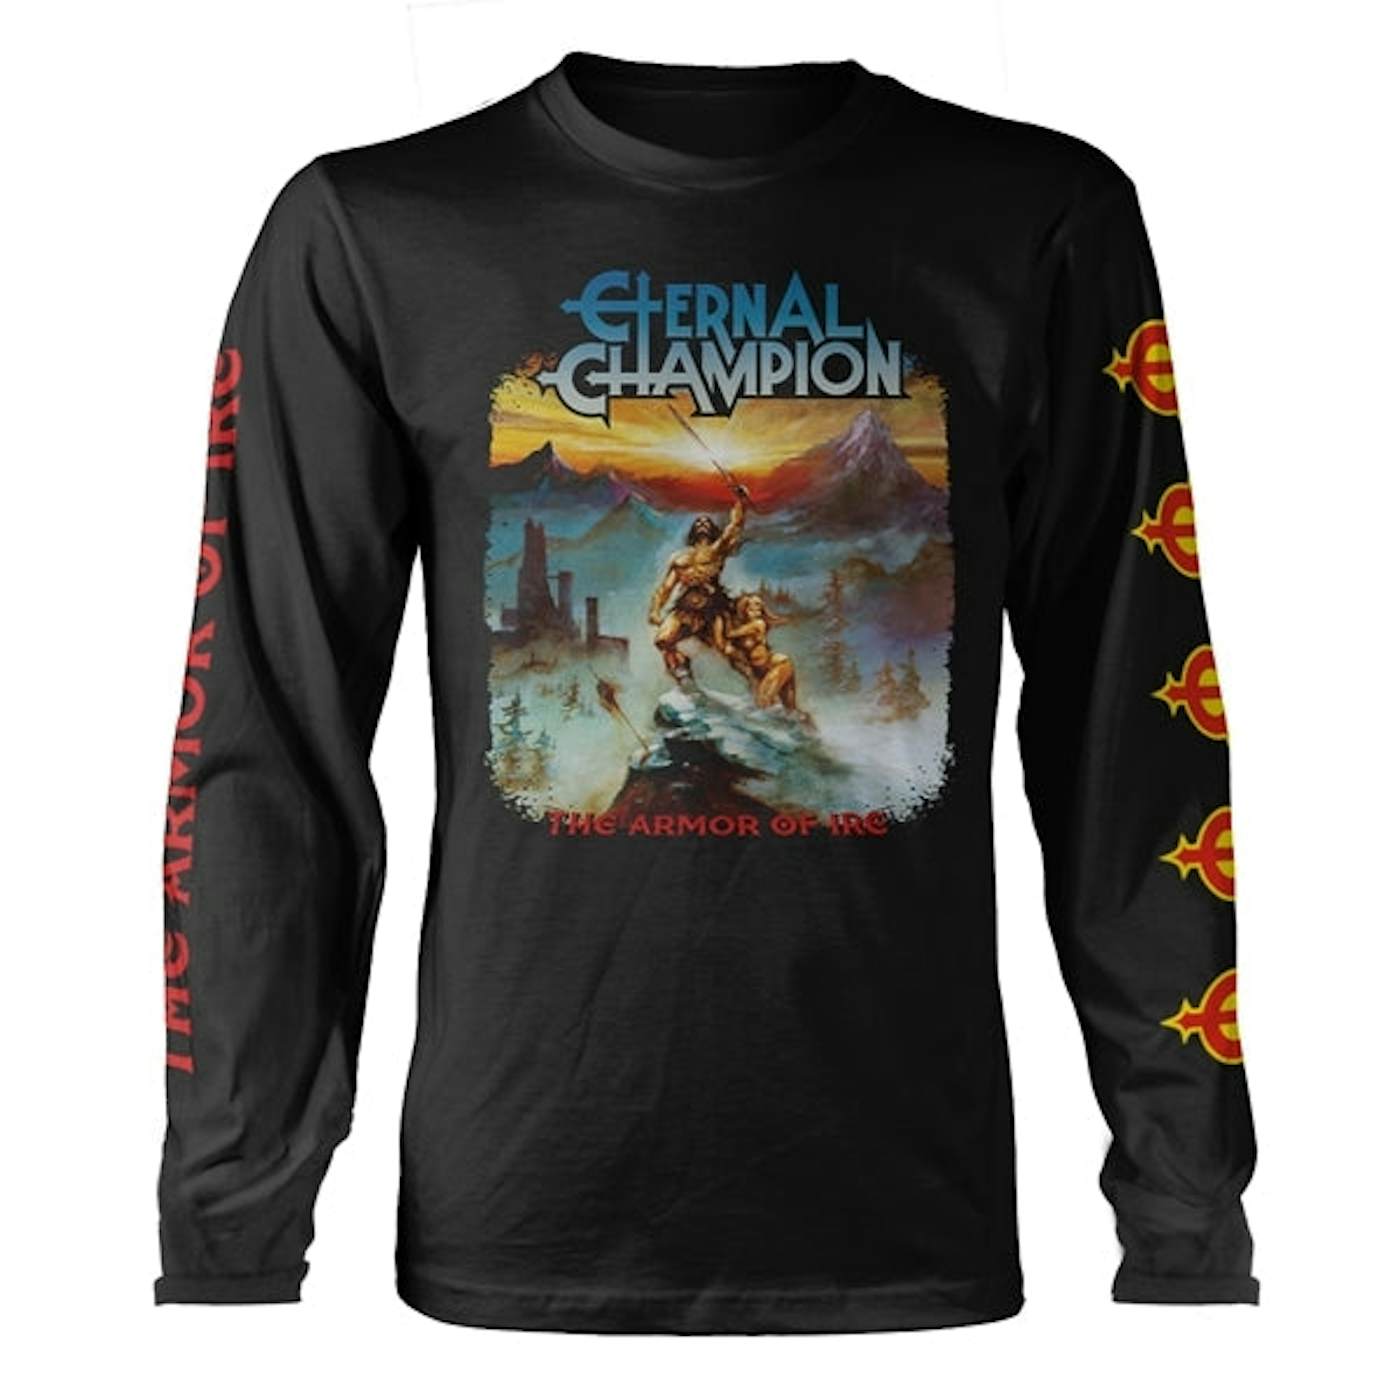 Eternal Champion Long Sleeve T Shirt - The Armor Of Ire